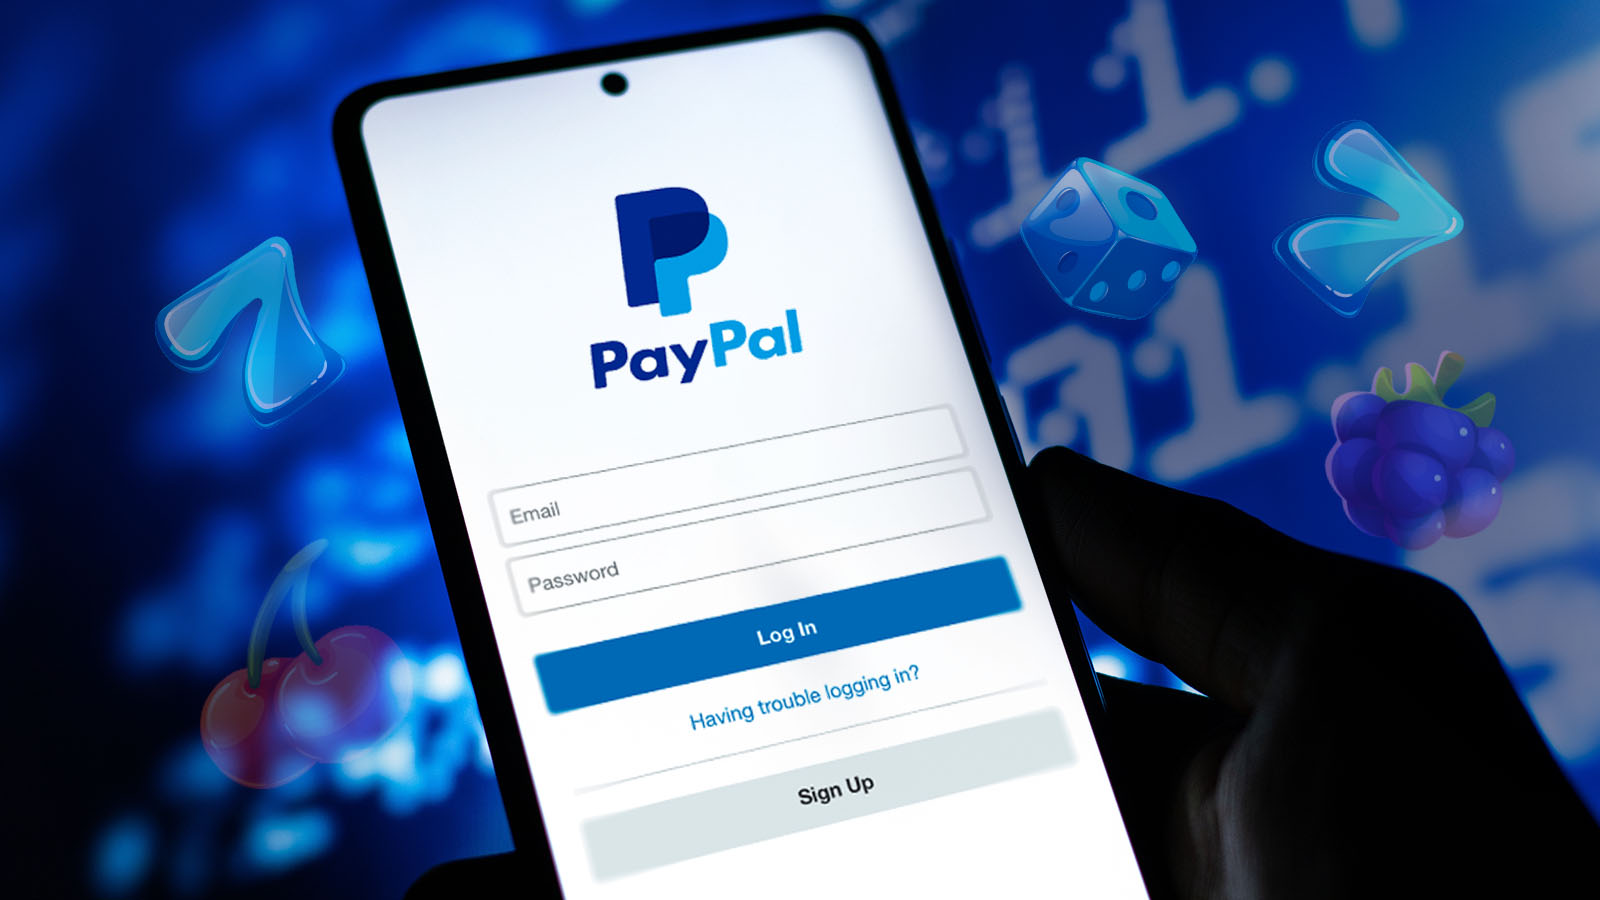 Why do players prefer to use PayPal at online casinos